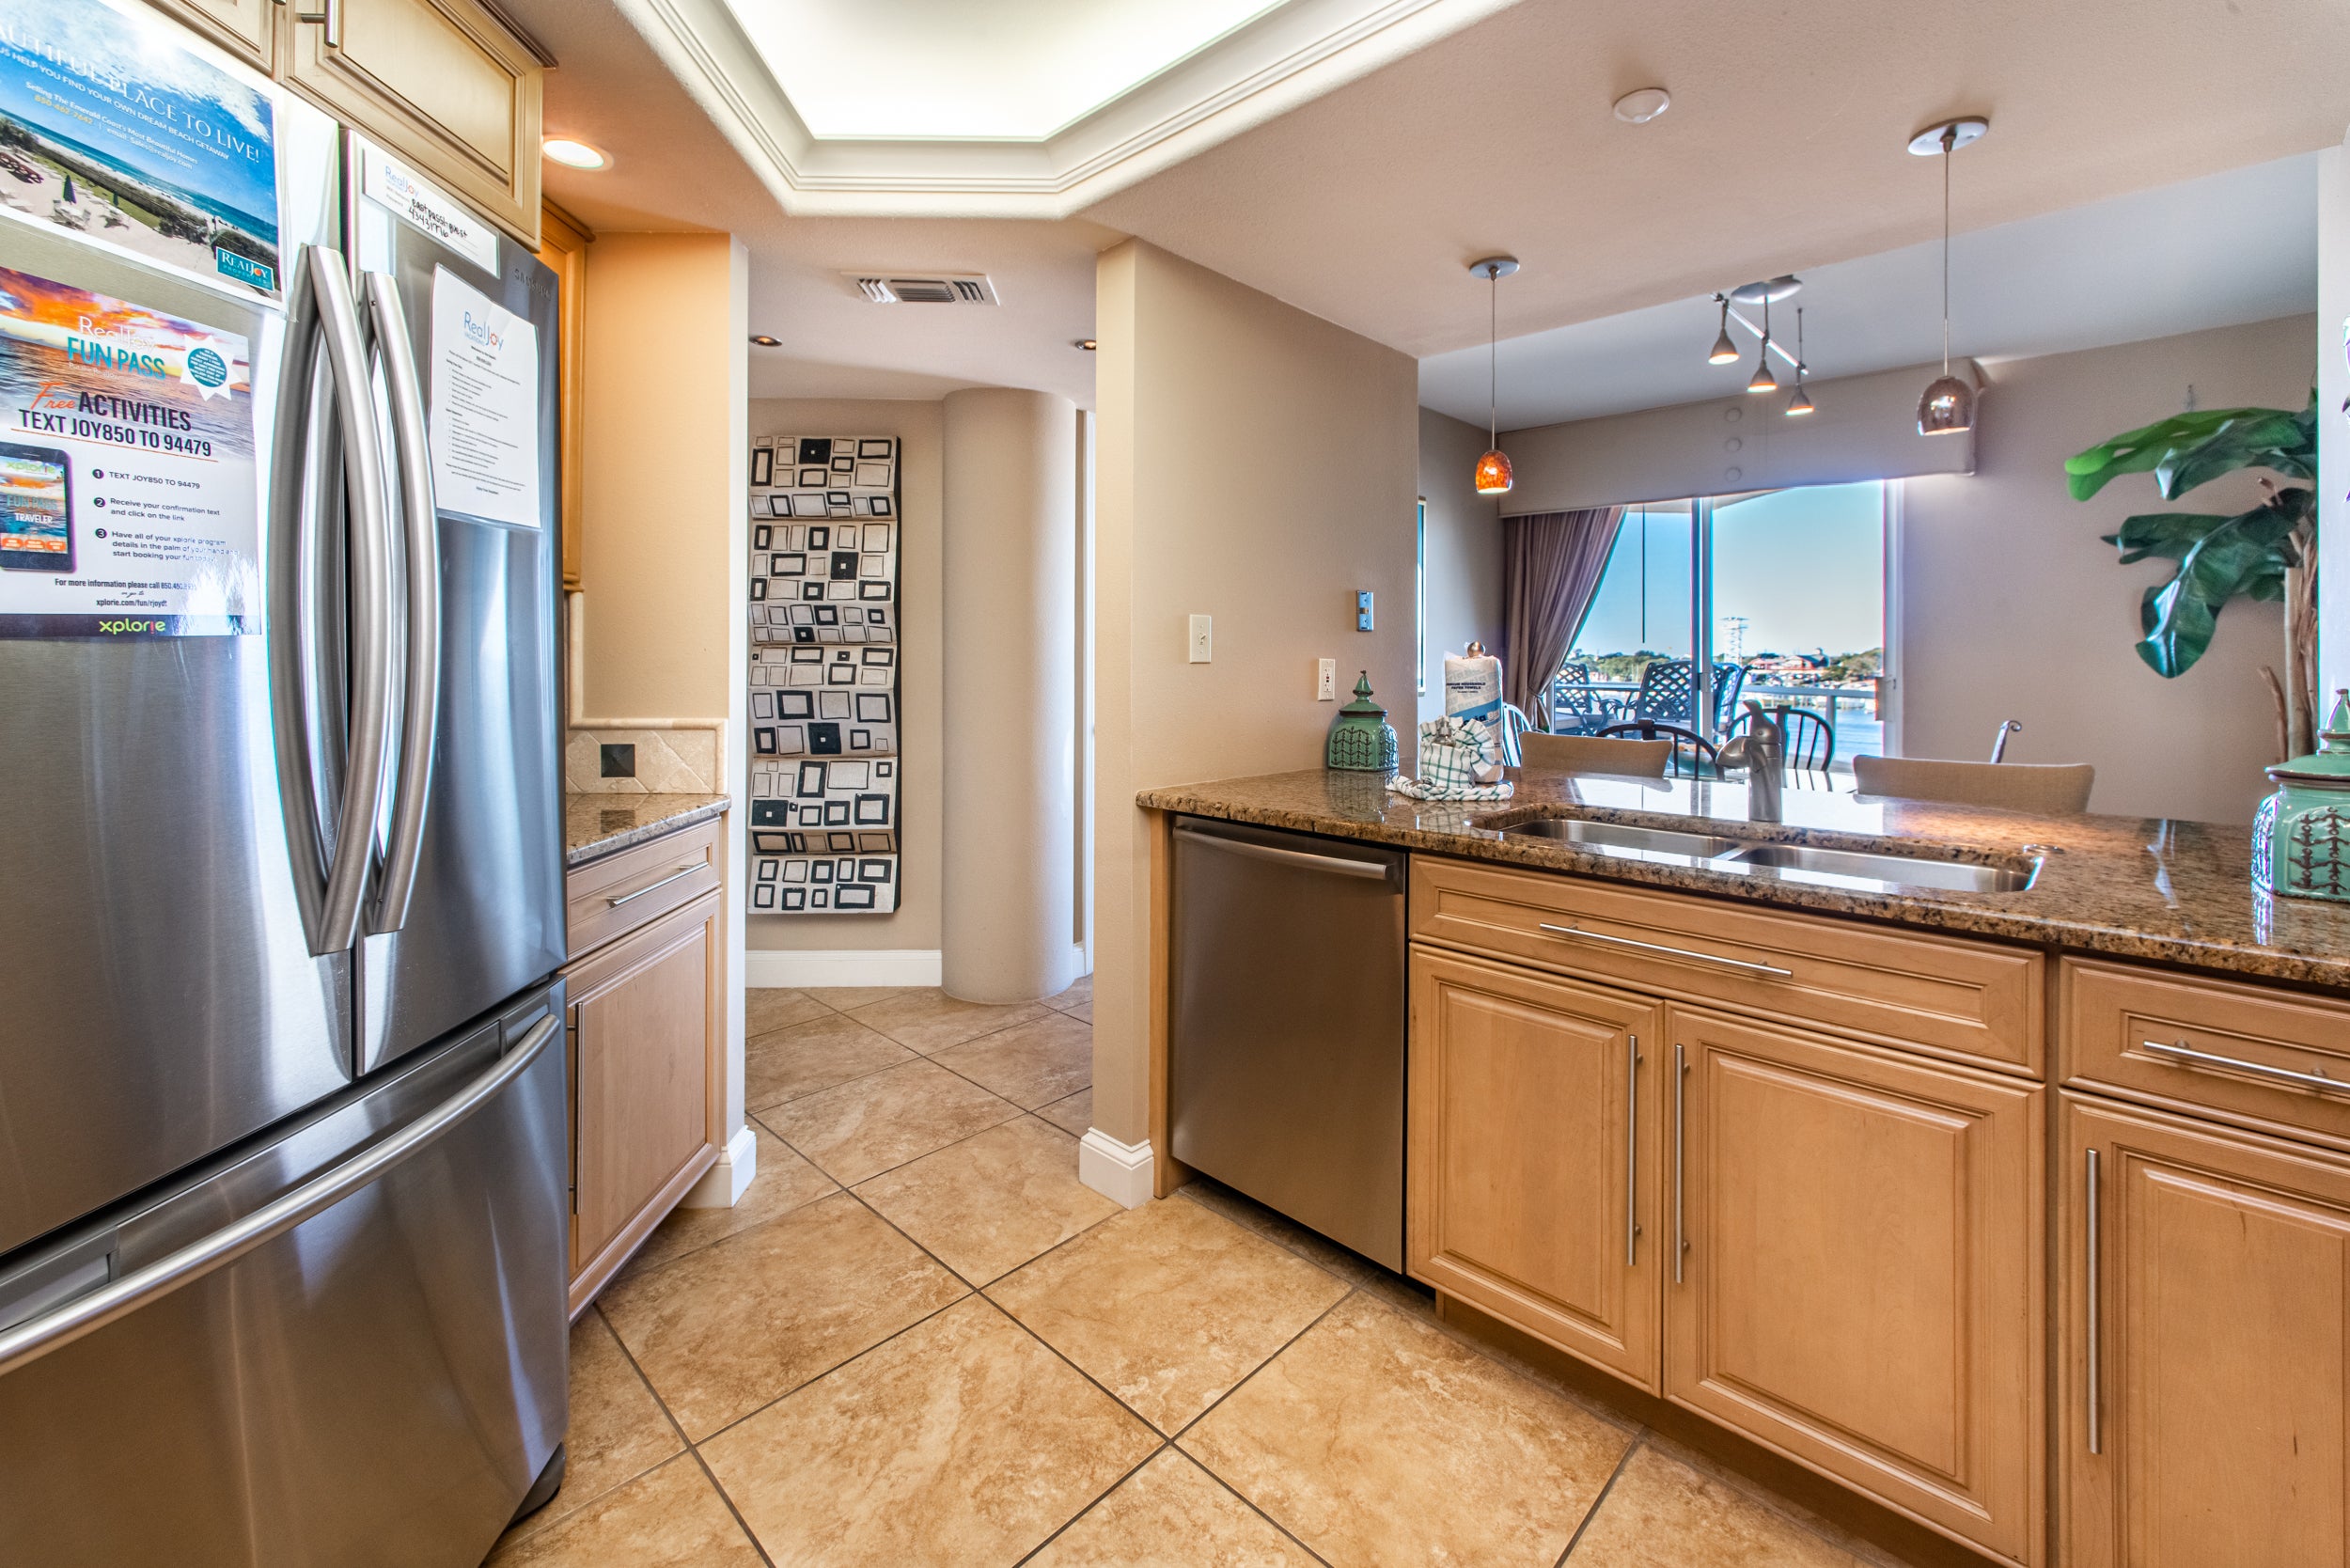 Granite Counter Tops and Stainless Appliances